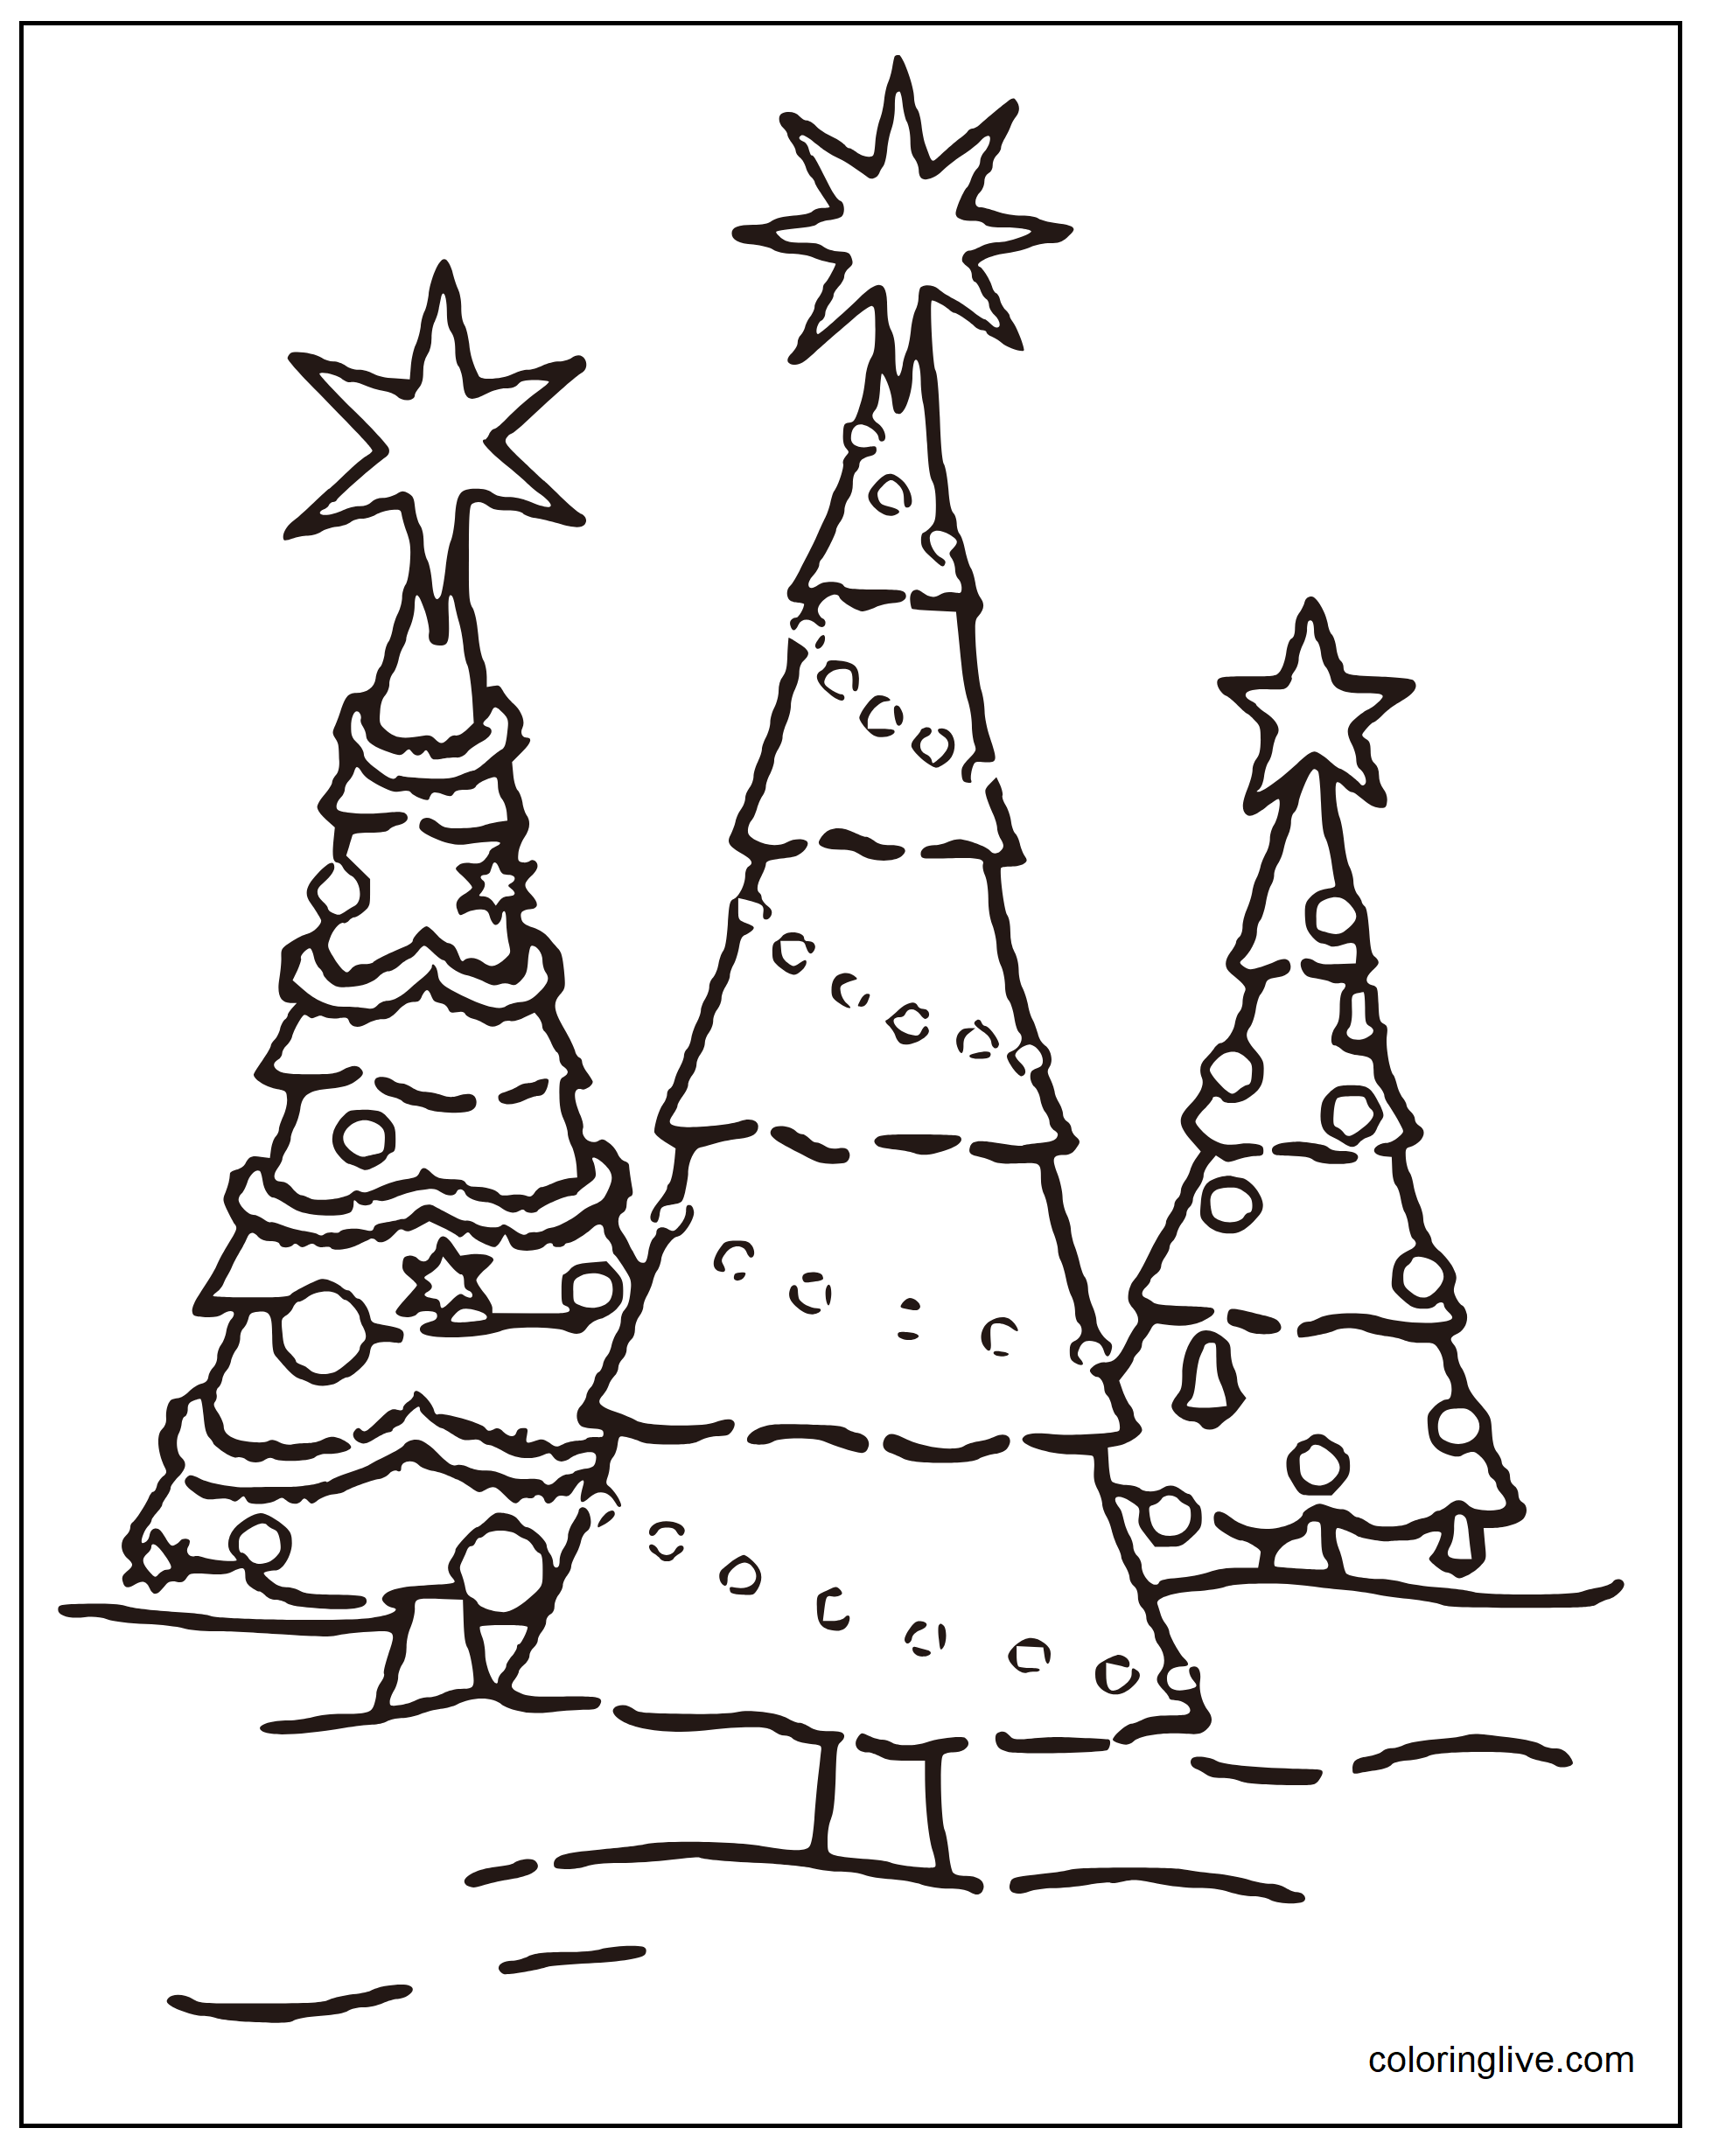 Printable Three christmas trees together Coloring Page for kids.